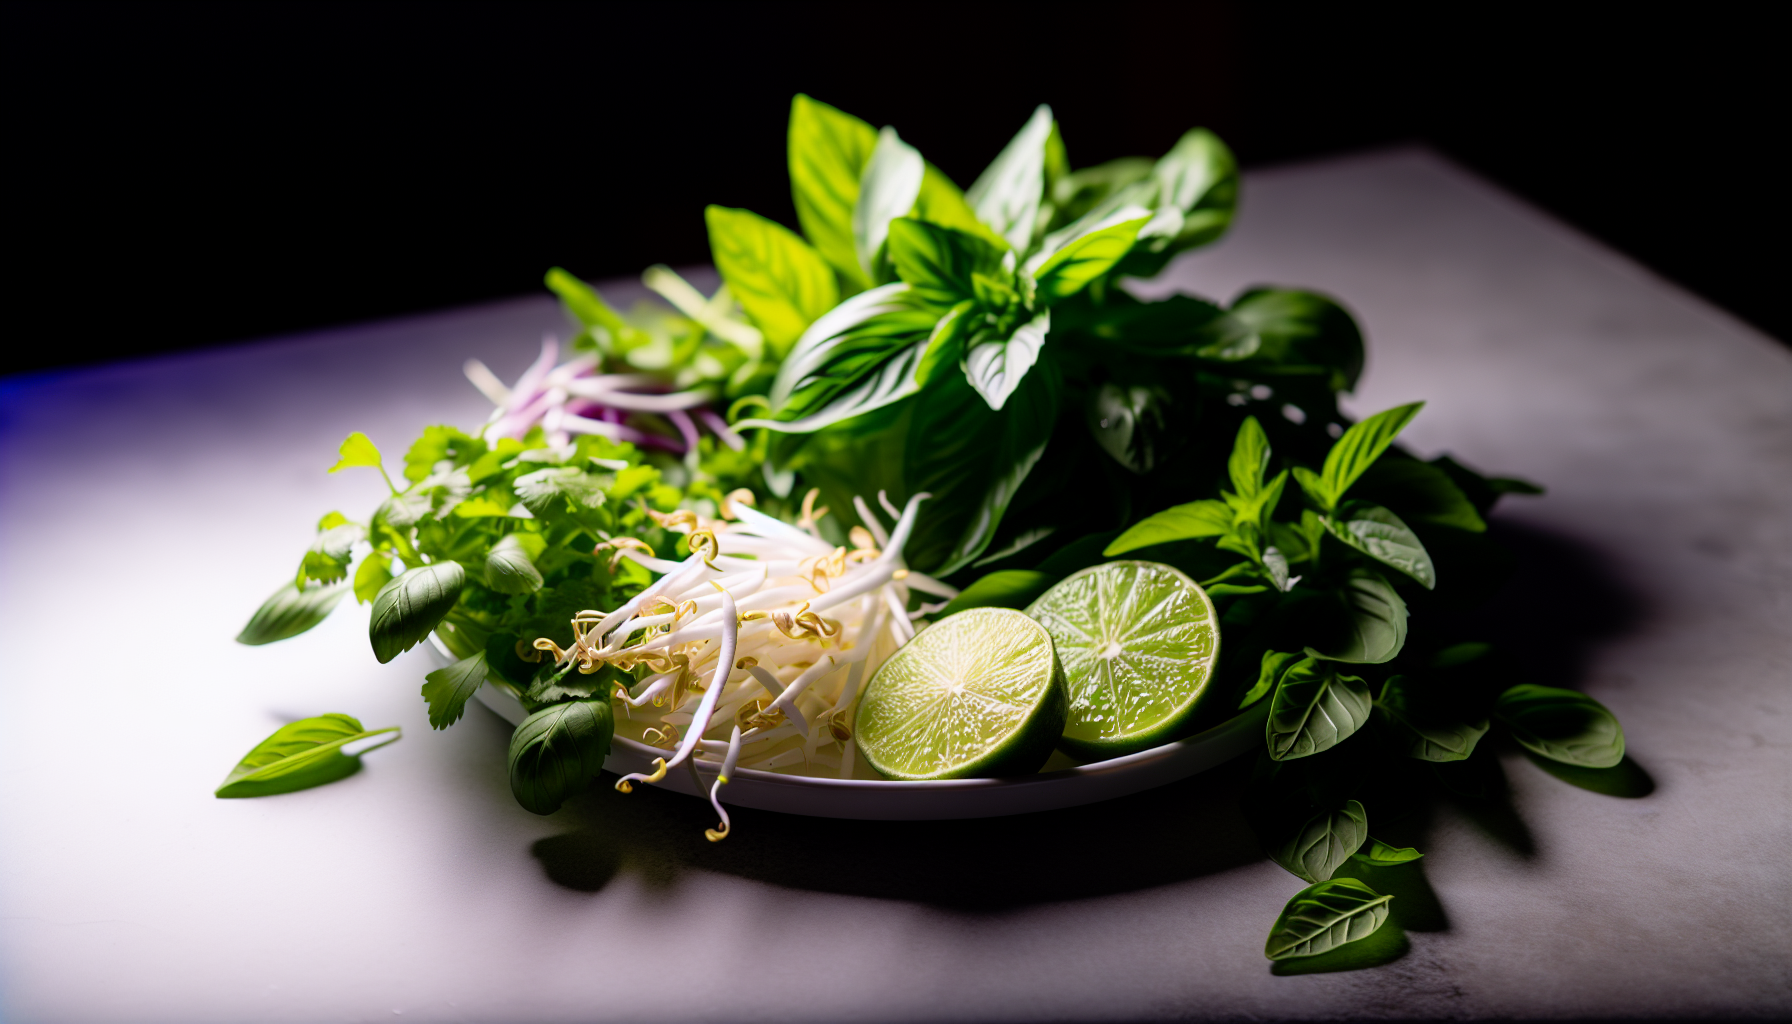 Fresh herbs, bean sprouts, and lime wedges for garnishing Vietnamese pho